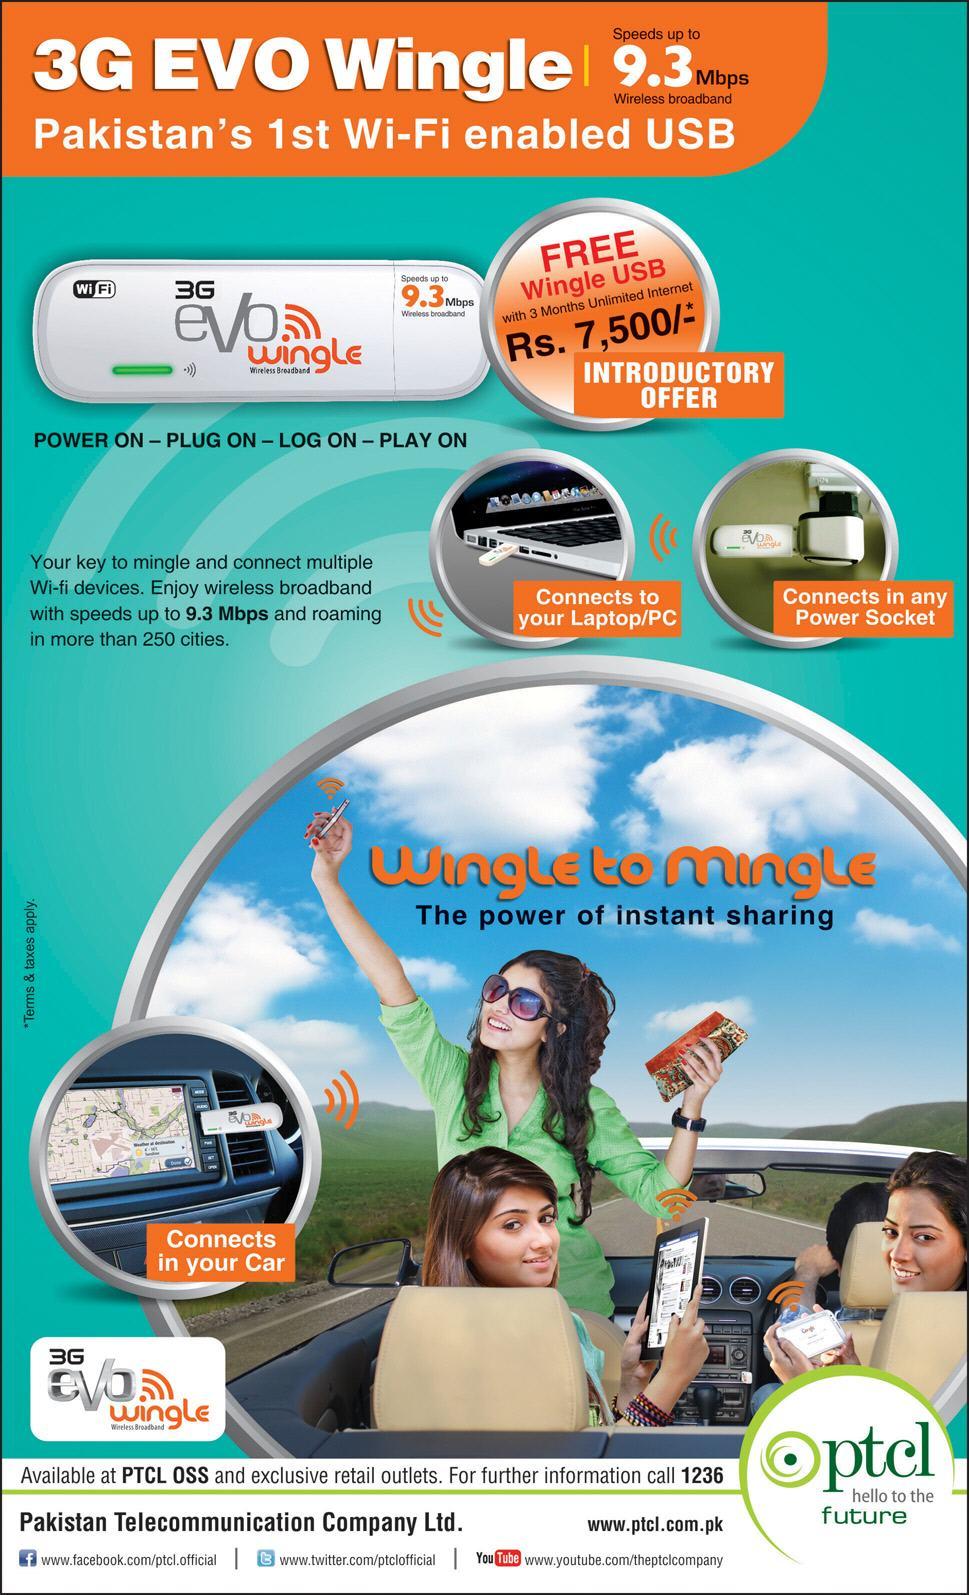 PTCL Brings 3G Evo Wingle 9.3 Mbps Wifi Enabled USB